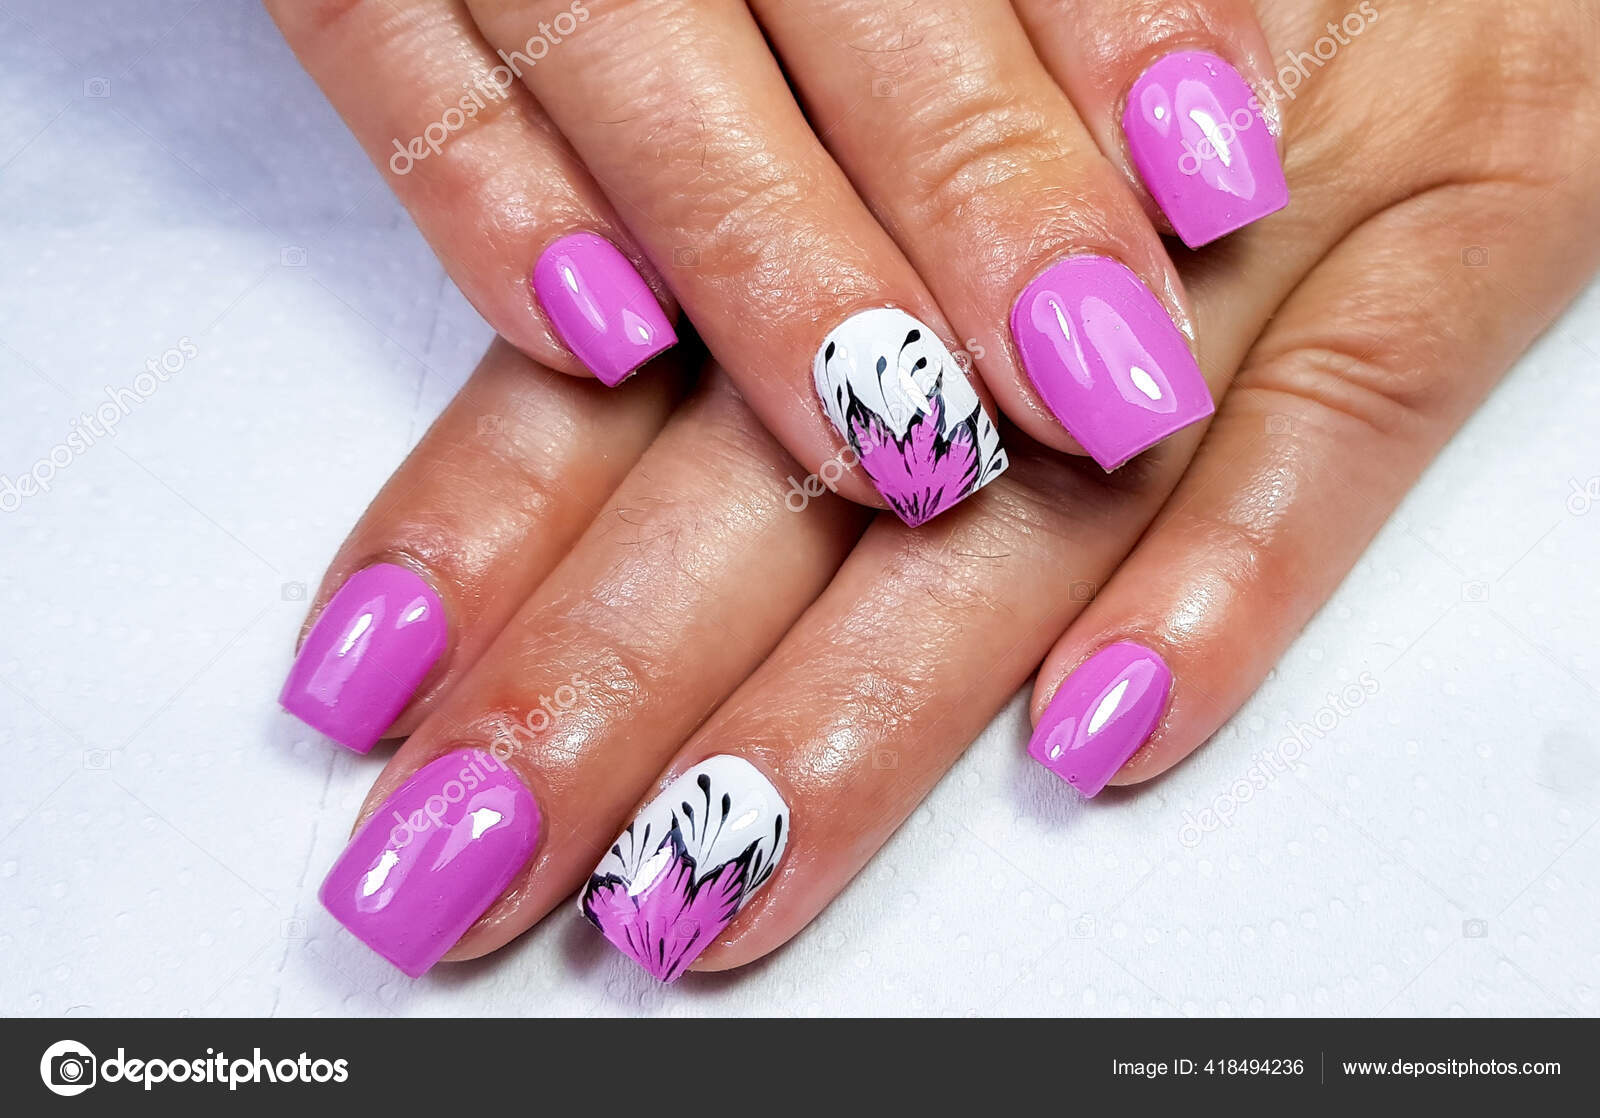 Premium Photo | A nail art design with purple and purple nails